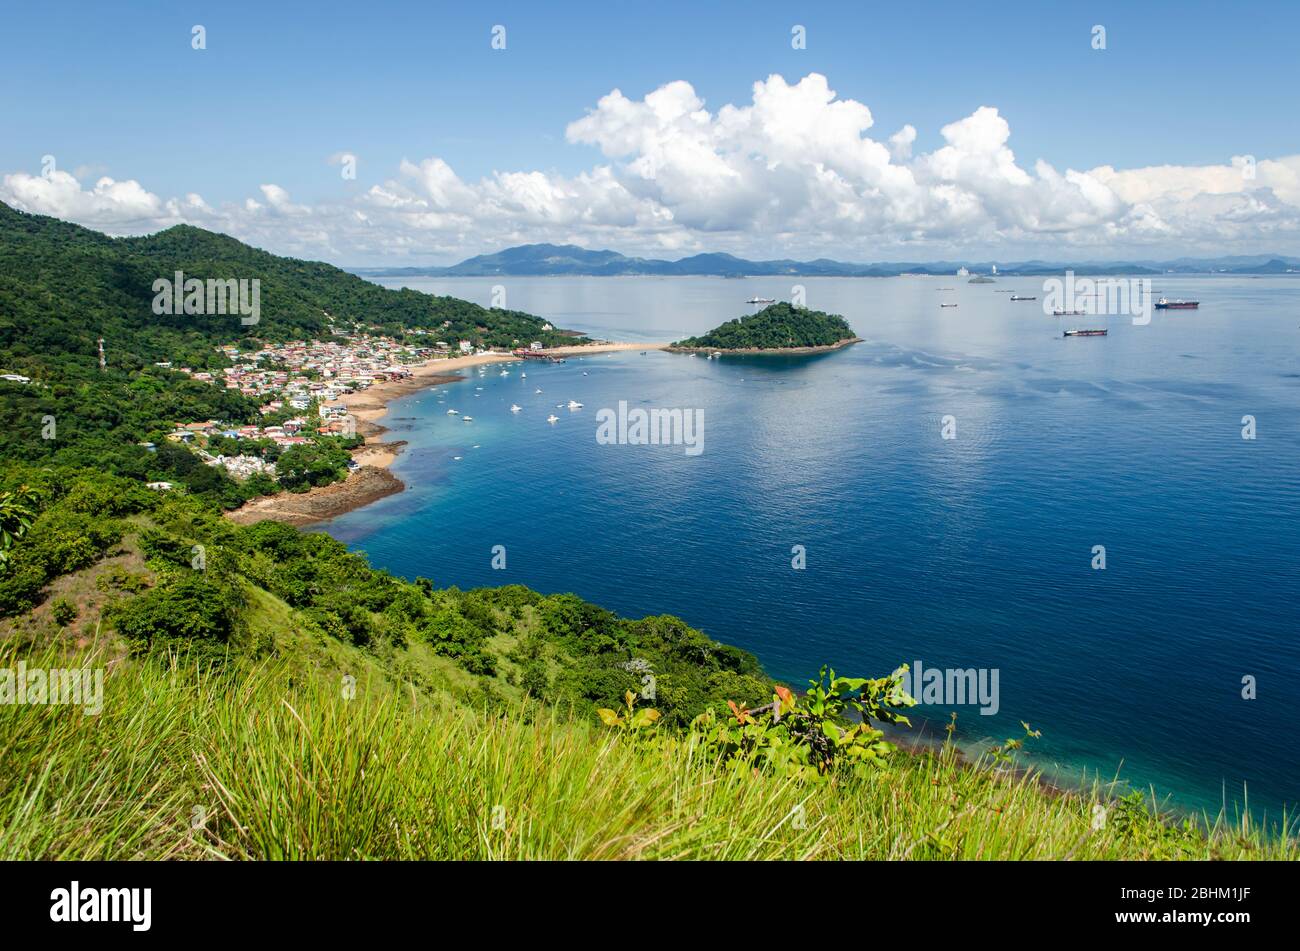 Stunning landscape view of Taboga Island in the Bay of Panama Stock Photo